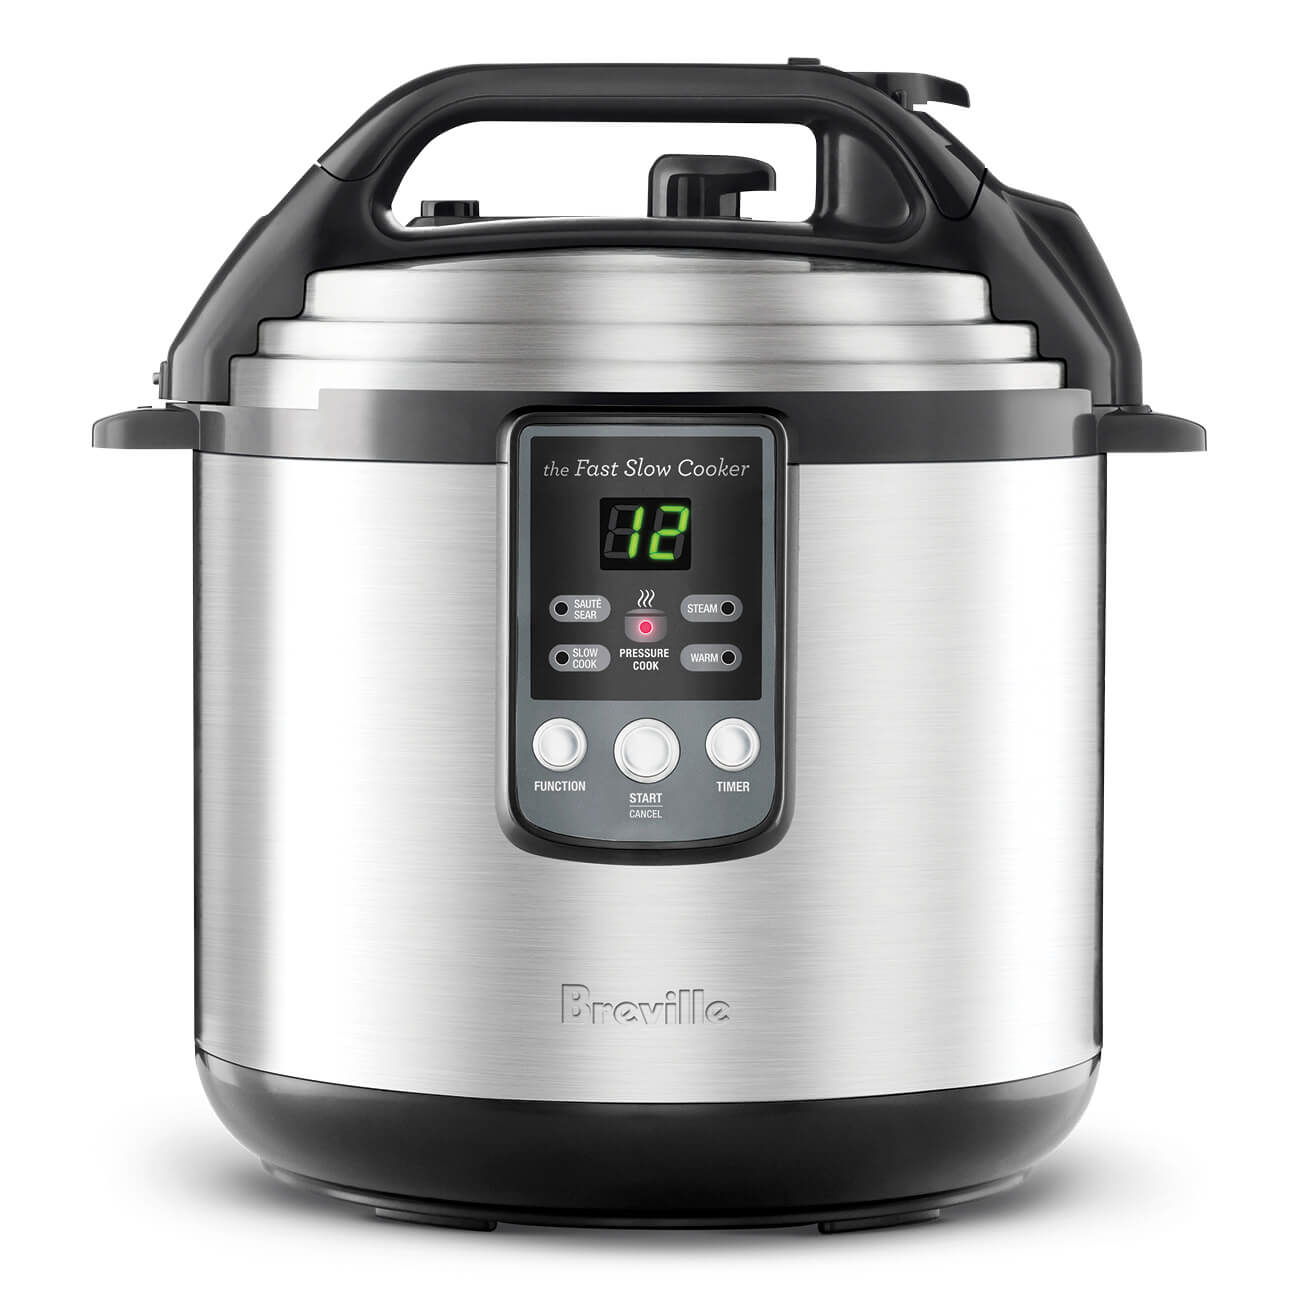 The Fast Slow Cooker Breville